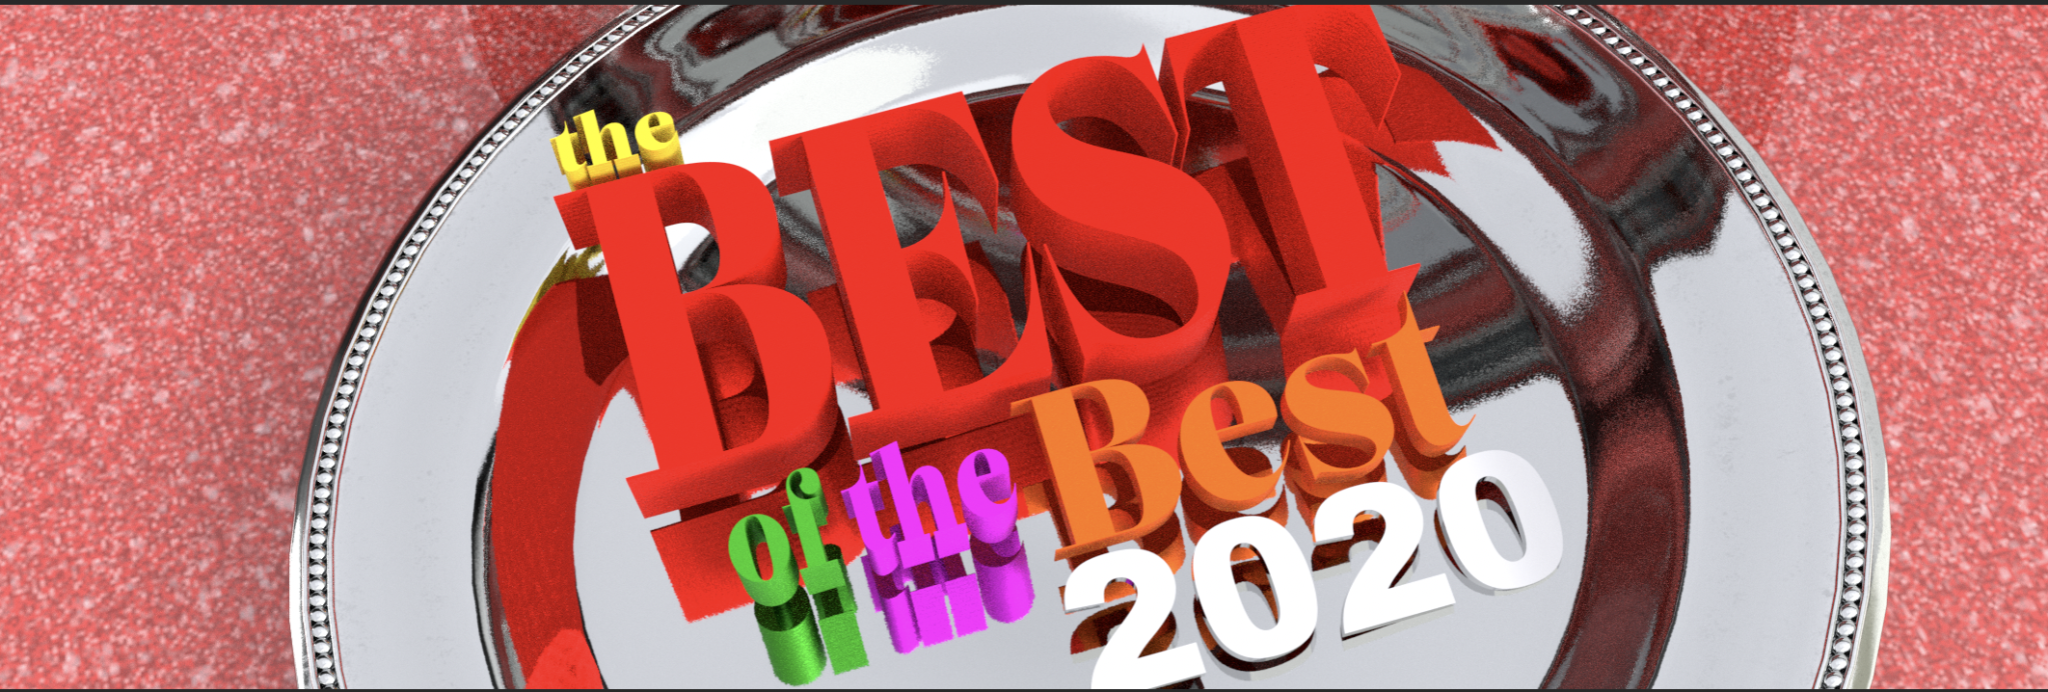 The Best of the Best 2020 – Oklahoma Magazine